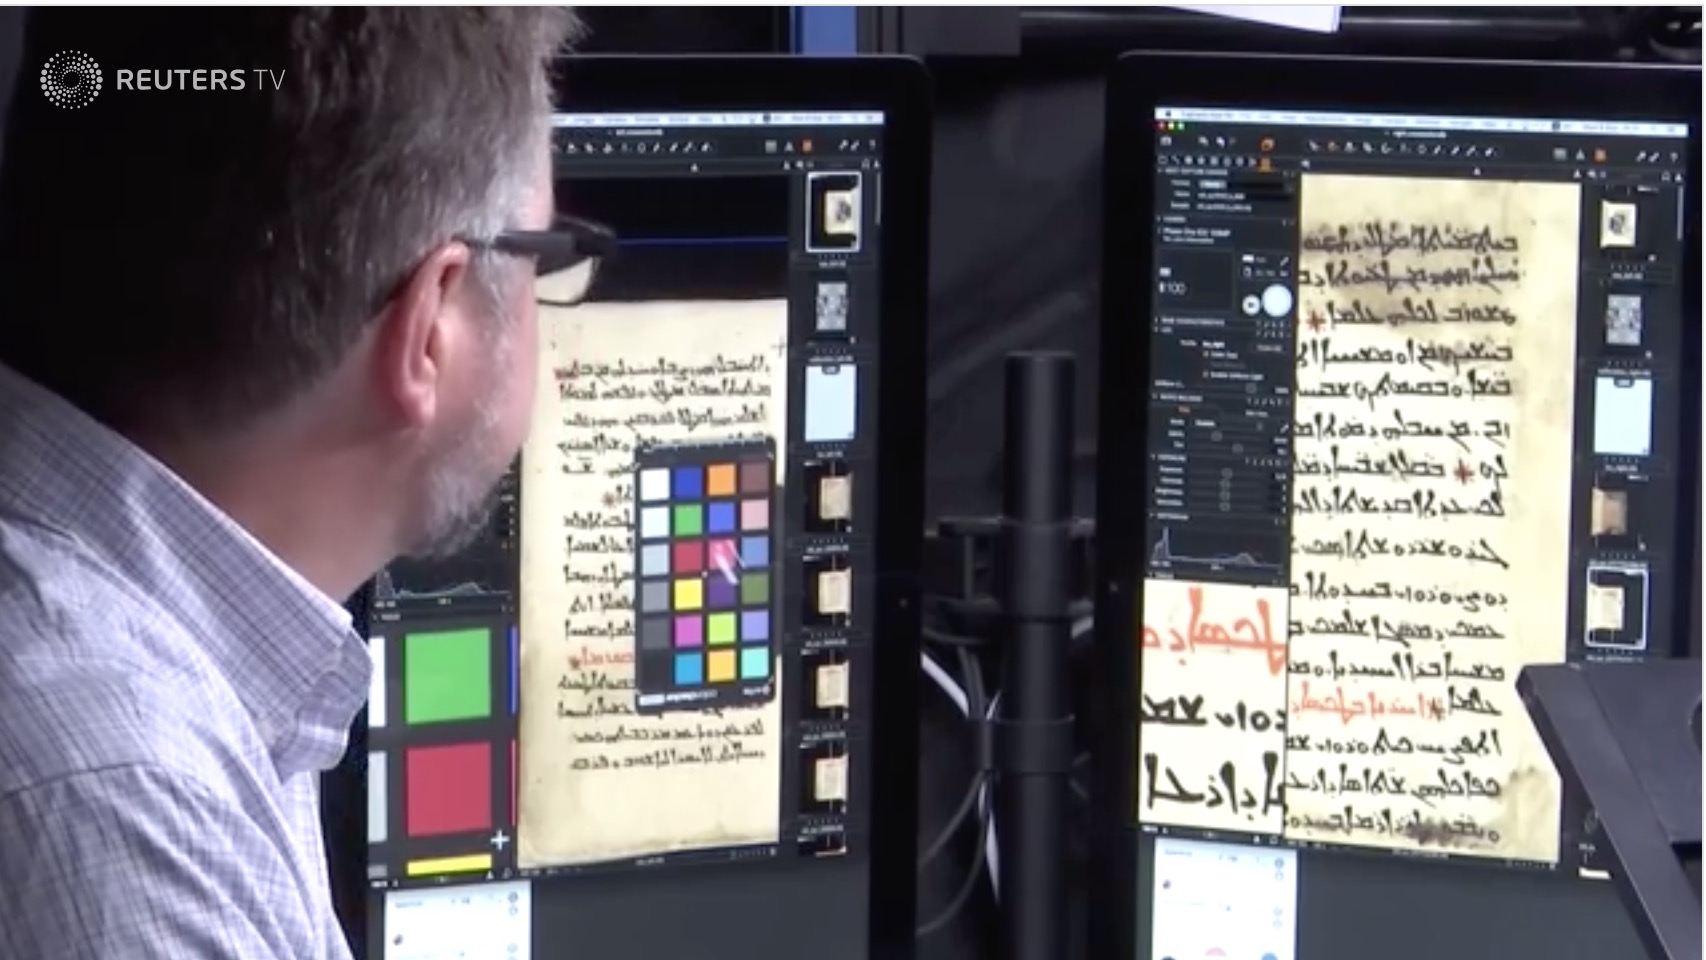 Mount sinai monastery has its ancient christian manuscripts being digitized